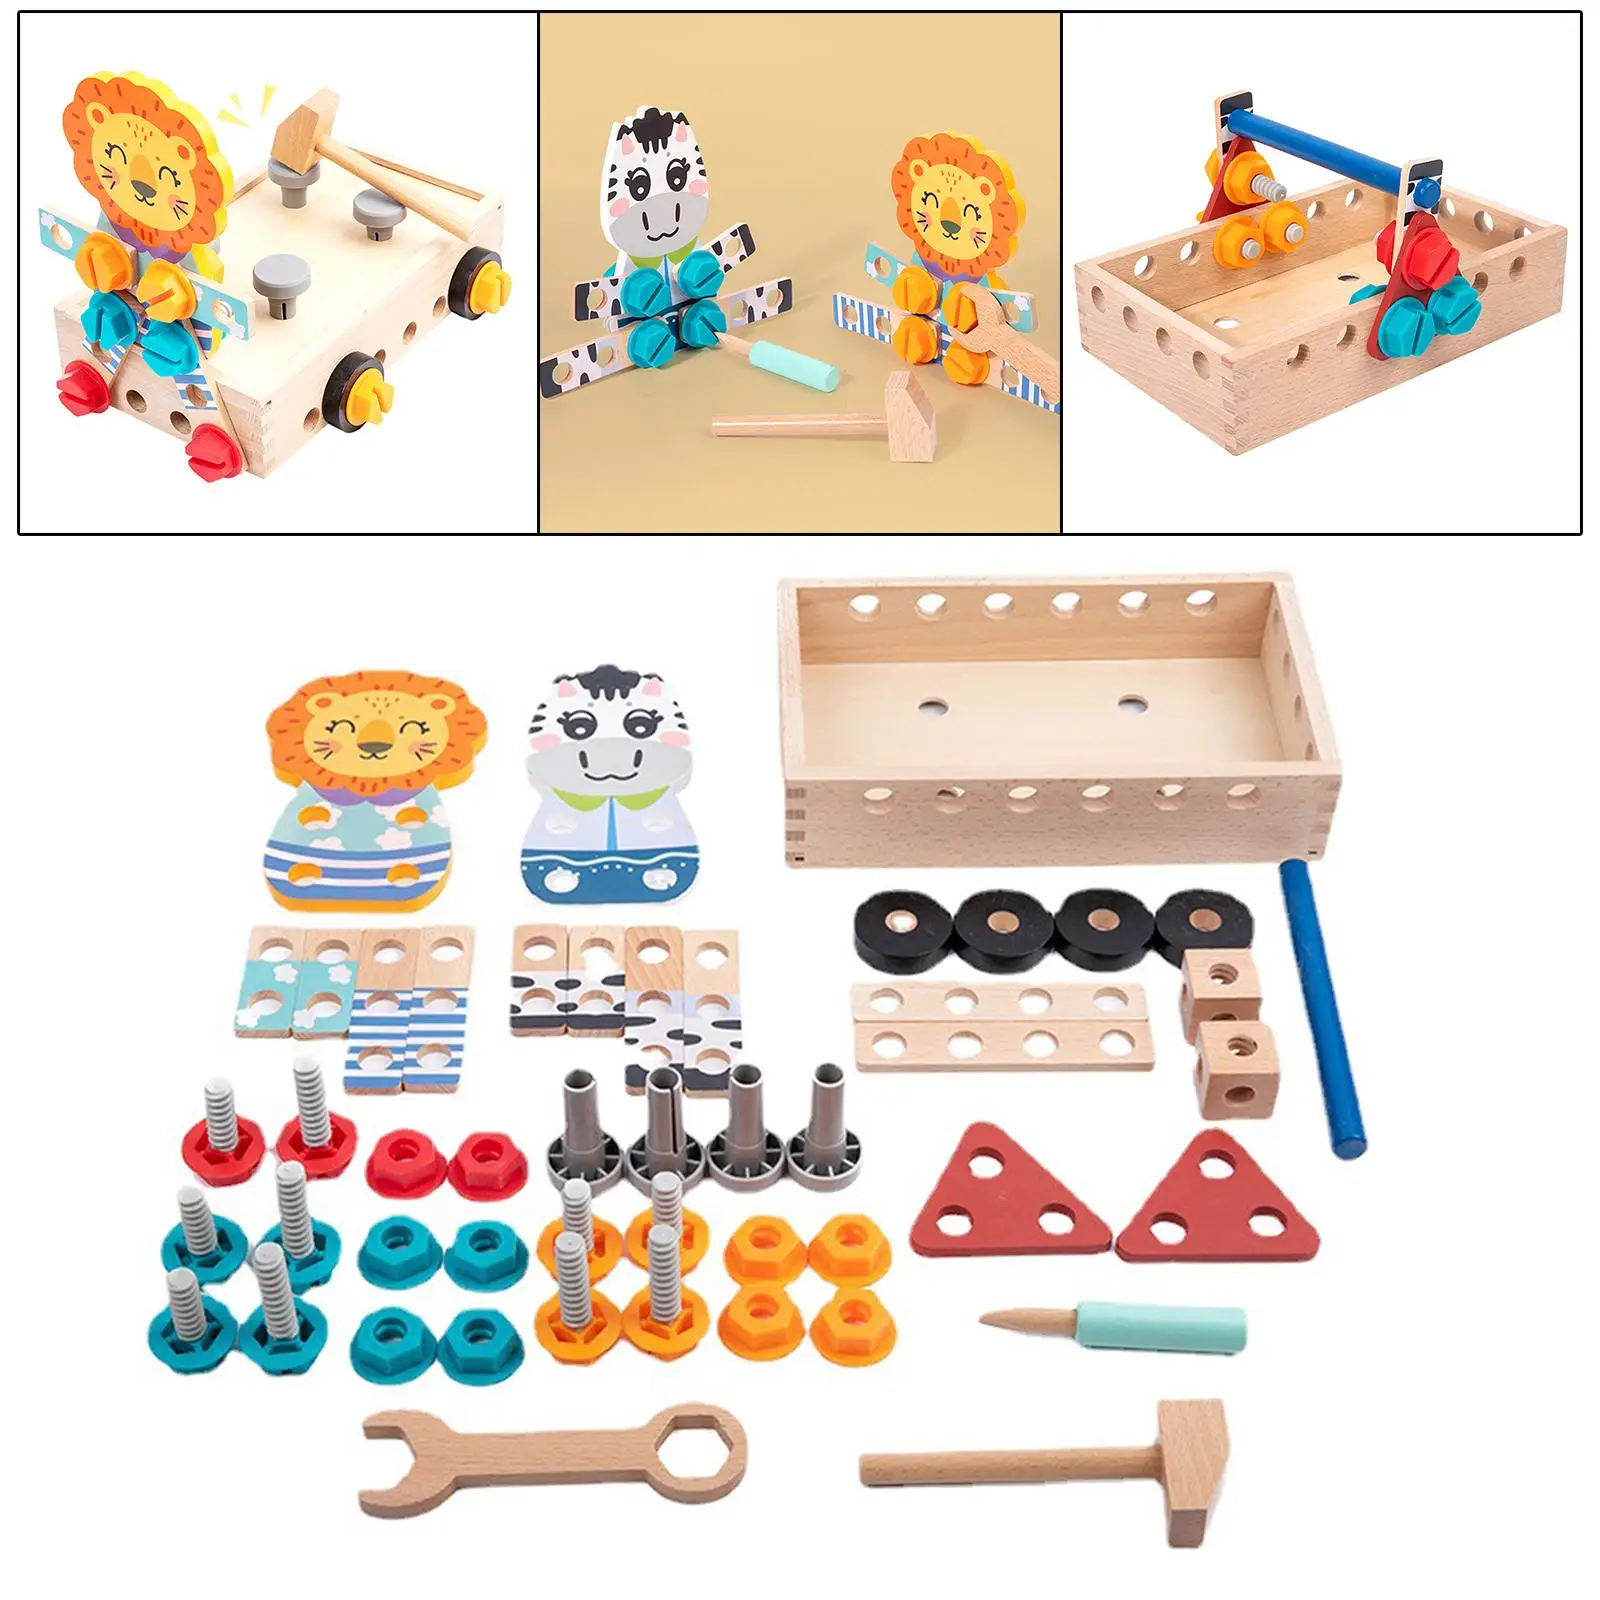 Wooden Tool Set Educational Pretend Game Toolbox Construction Building Toy for Role Play Preschool Activities Outdoor Indoor